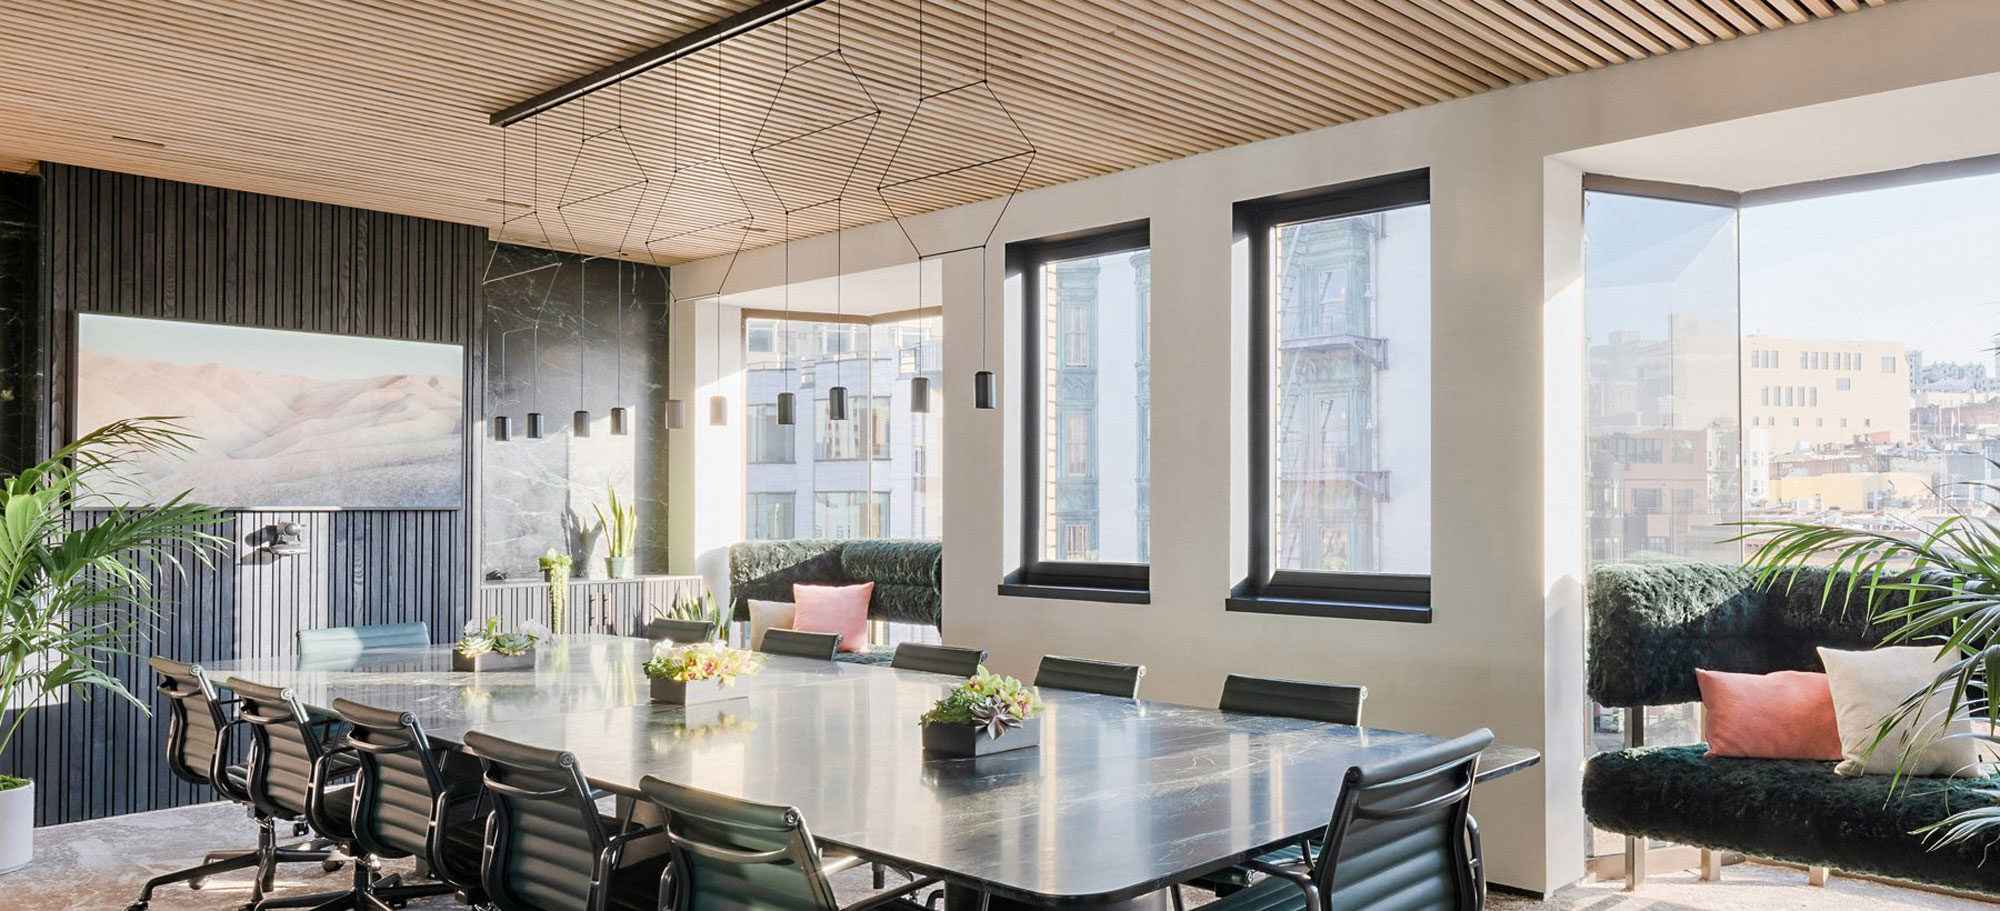 Travel Awards Best Coworking Spaces 2019 Surface